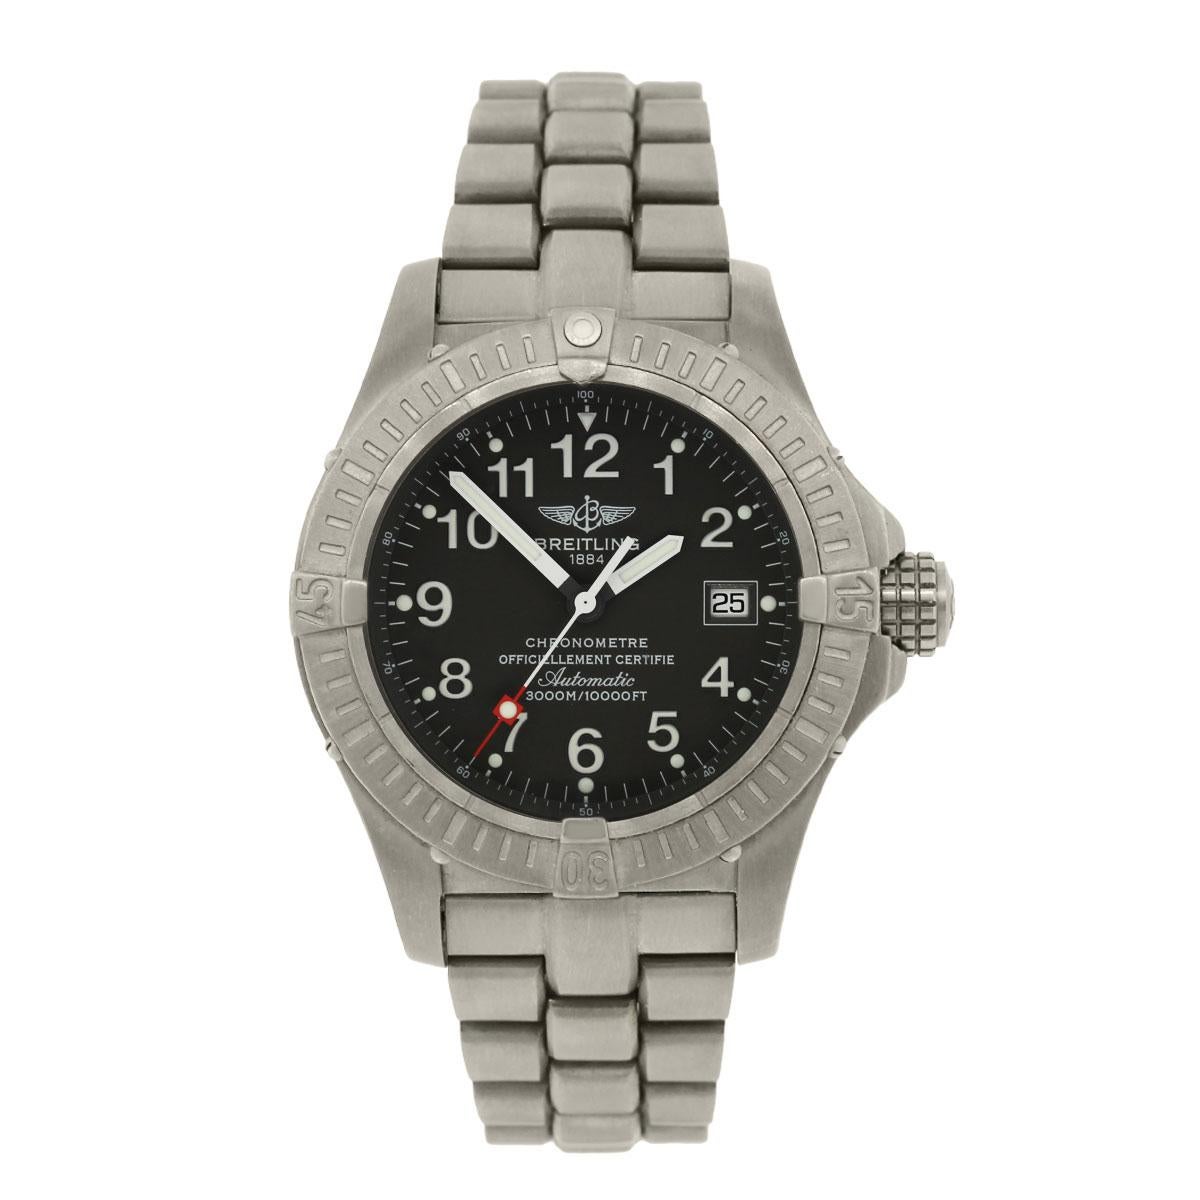 Brand: Breitling
MPN: E17370
Model: Avenger Seawolf
Case Material: 
Case Diameter: 44mm
Crystal: Sapphire
Bezel: Titanium unidirectional bezel
Dial: Grey dial with date window at the 3 o’clock position
Bracelet: Titanium
Size: Will fit a 8″